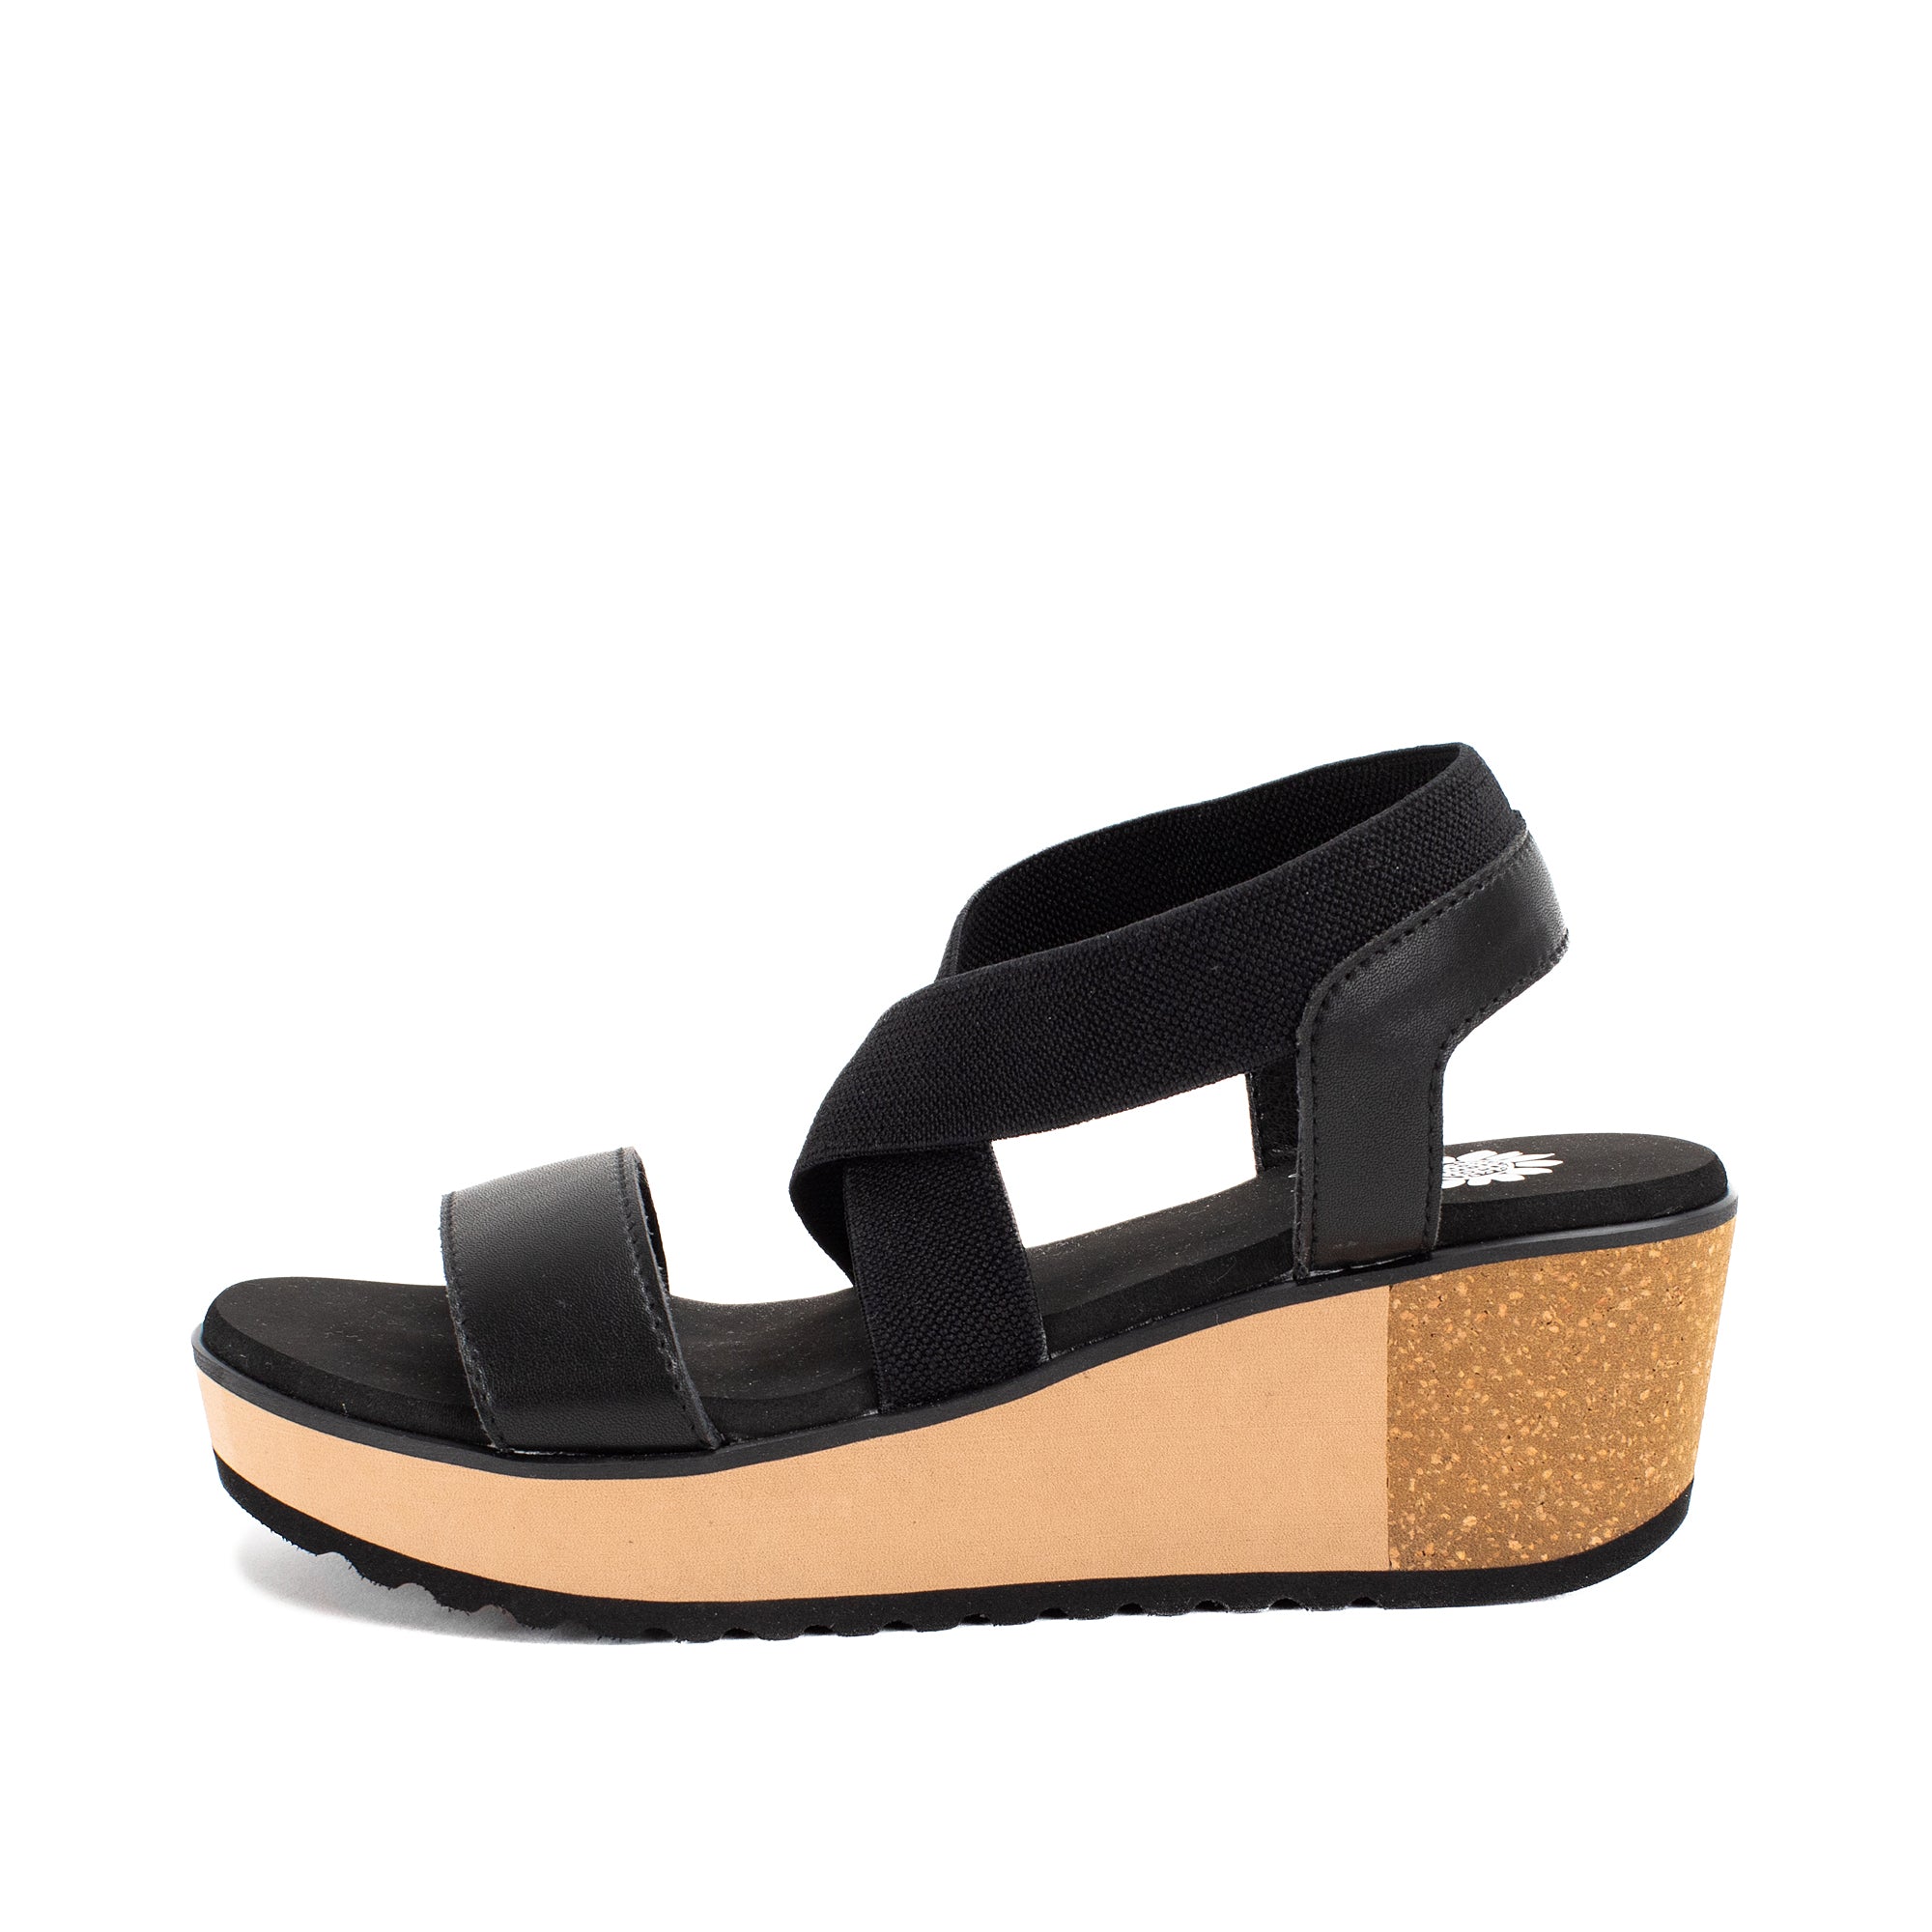 The Rekayla Elastic Sandals Are Just $22 at